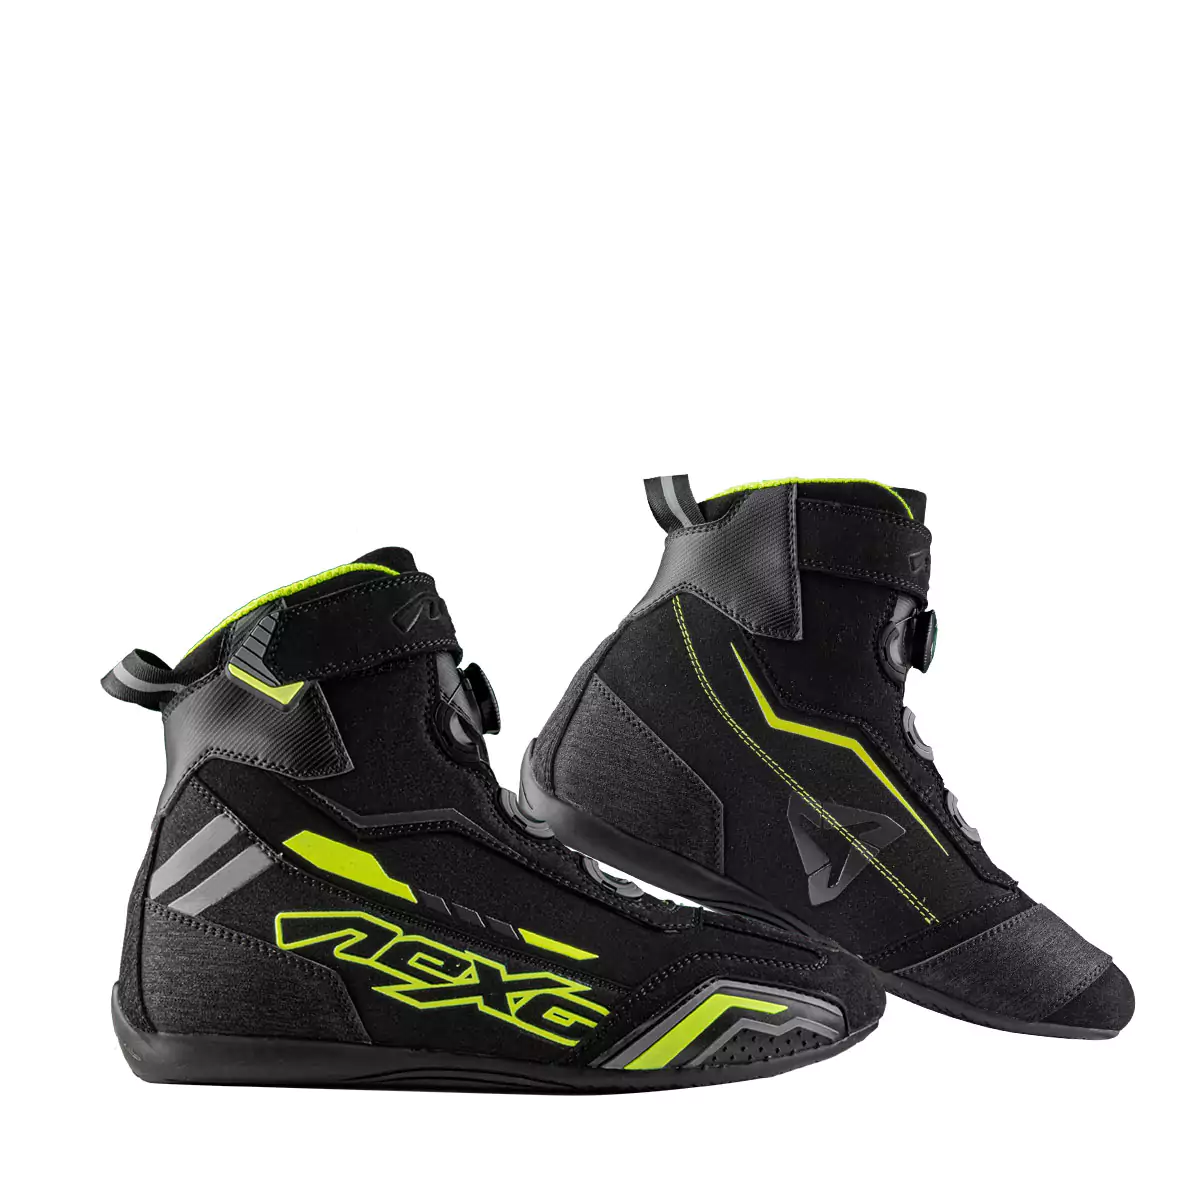 a pair of balck car racing boots written nexo on them in neon colour